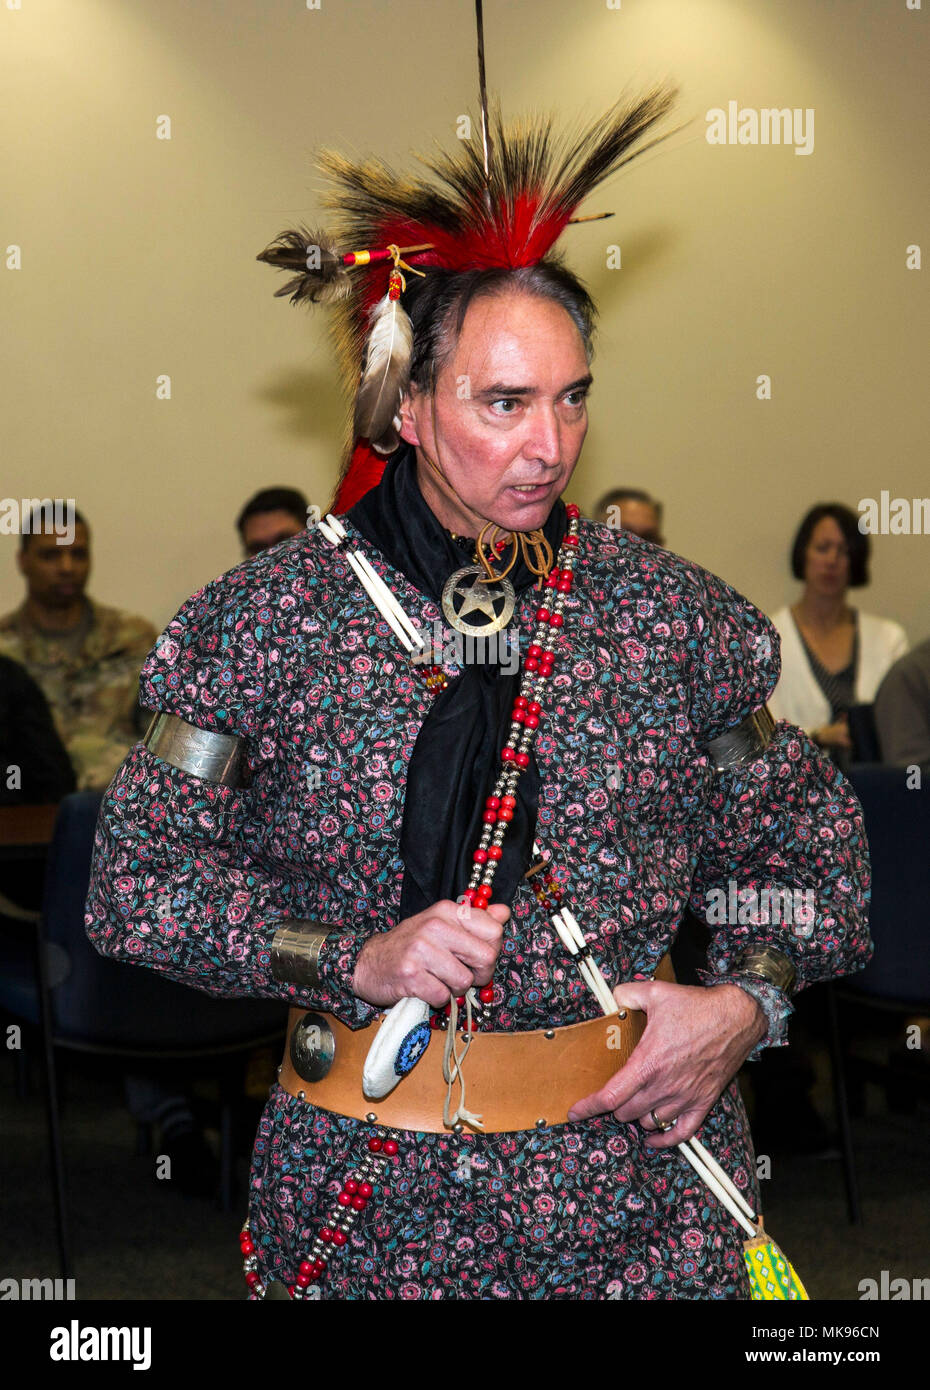 MacDill AFB, Fla. – (Nov. 29, 2017) Retired U.S. Navy Master Chief and USCENTCOM civilian employee, Timothy Vickers discusses Kiowa culture during a presentation at U.S. Central Command headquarters. Vickers’ Kiowa tribal heritage stems from the line of Chief Satanta (White Bear), one of the best known, and last, of the Kiowa war chiefs. USCENTCOM celebrates National American Indian Heritage Month every November to recognize the contributions made by American Indian and Alaska Native people. Stock Photo